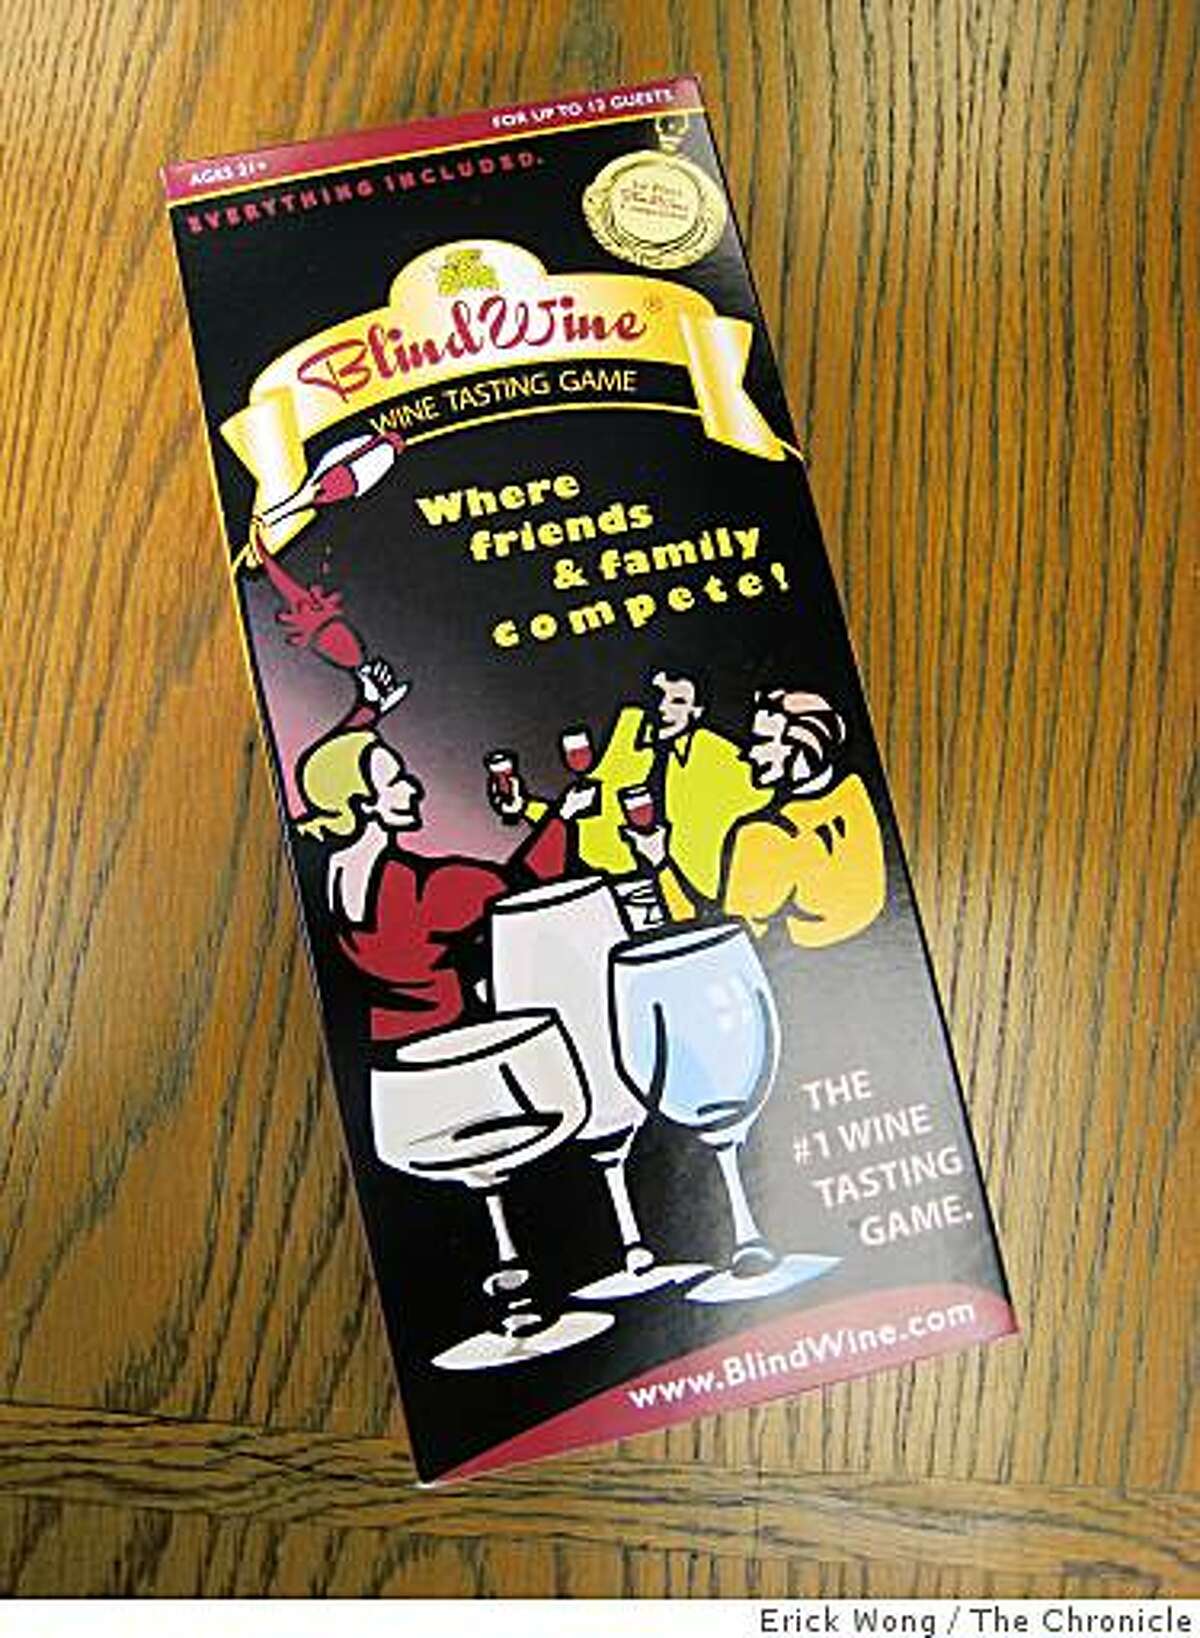 The Blind Wine tasting game provides invitations with instructions to guests with on specifics of the type wine to bring, reusable numbered bags, score cards, and a ?gold? medal for the winner.